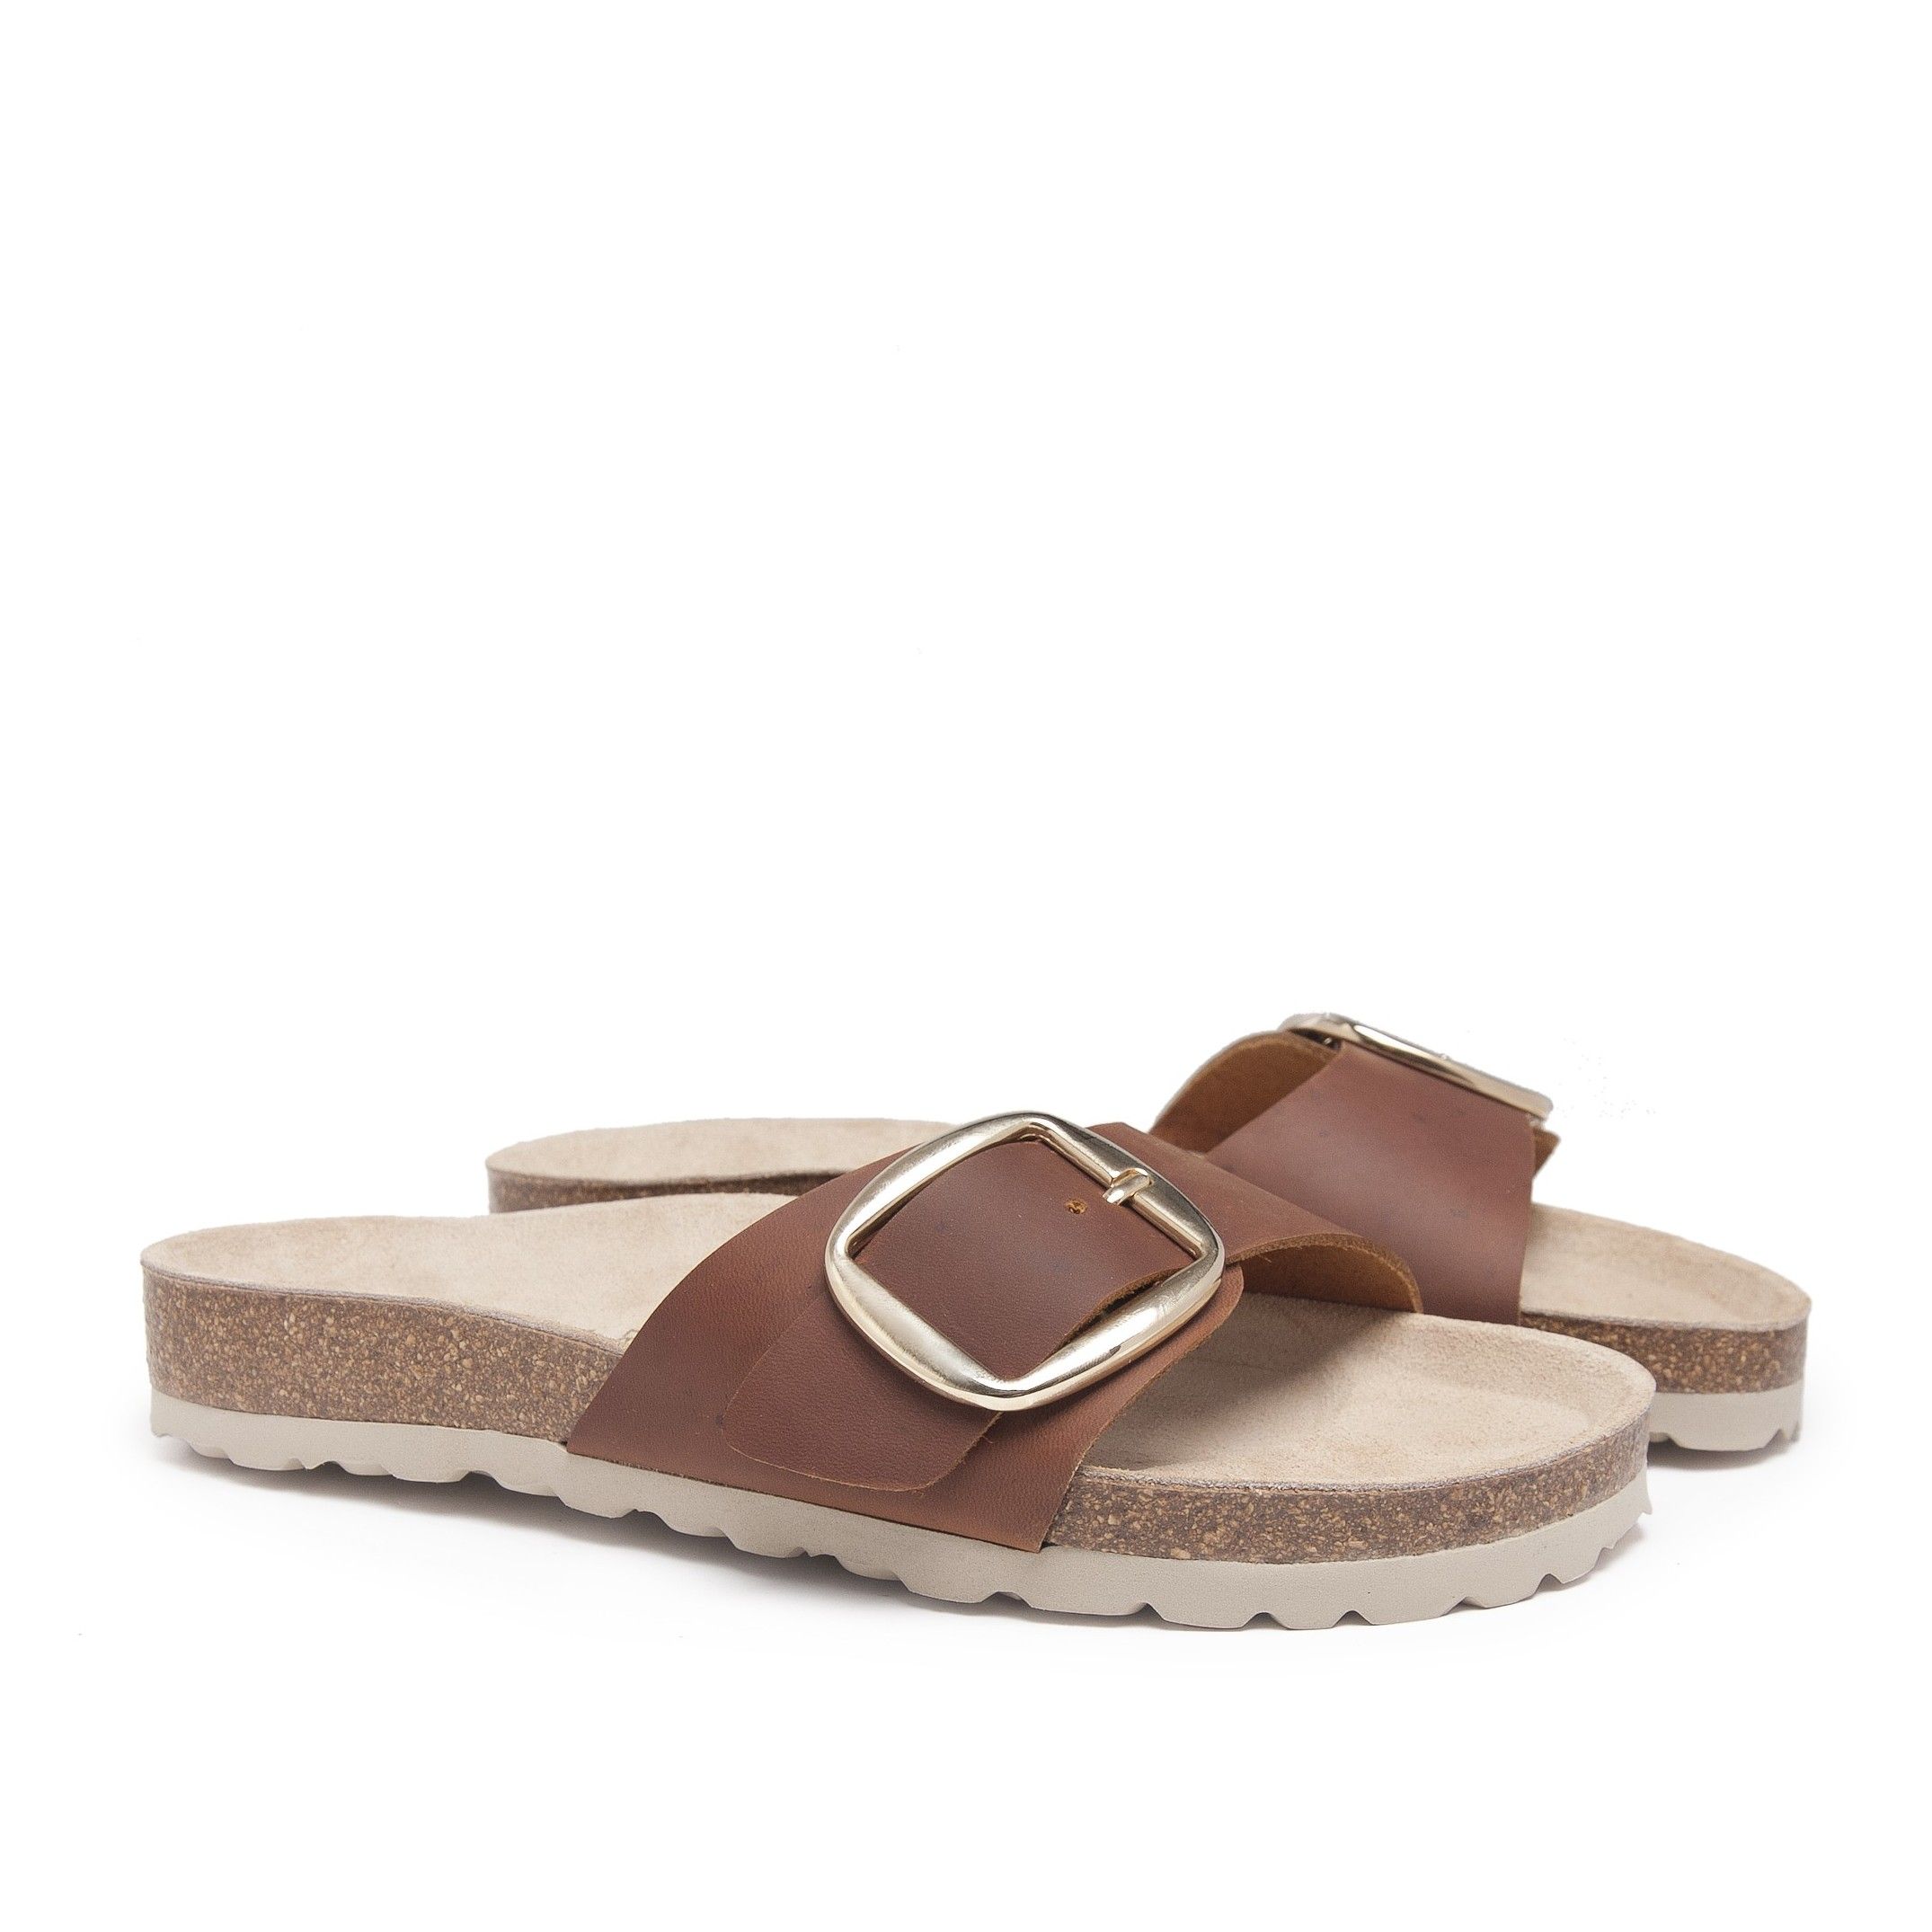 Bio sandal with a leather front buckle. Adjustable metal buckle. Exterior and interior made of leather. Platform: 1 cm. Sole: EVA. This product is manufactured in Spain.